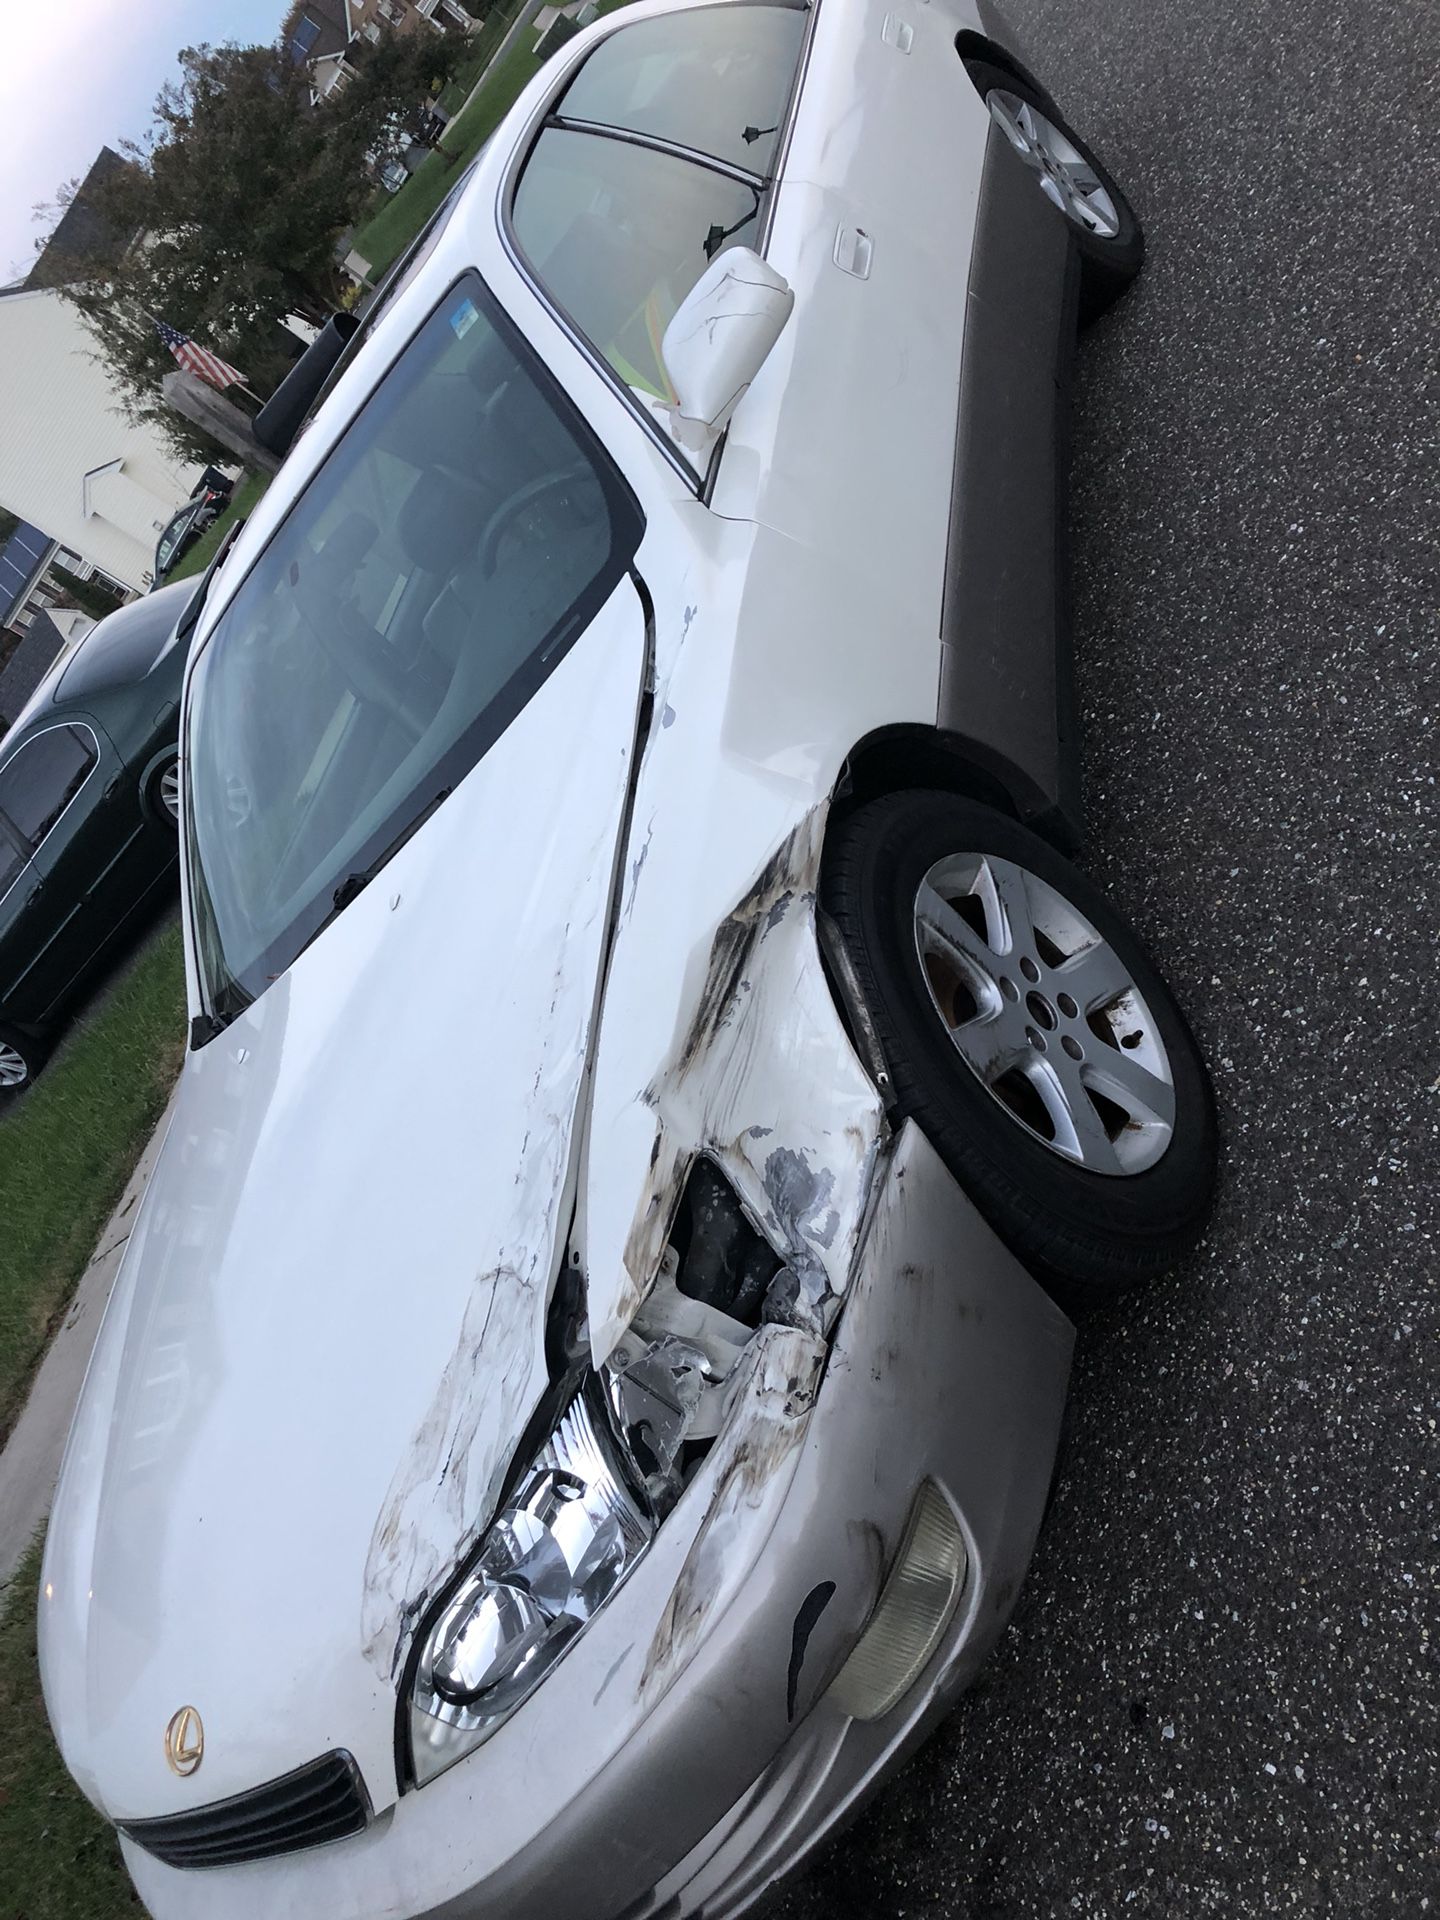 97 Lexus perfect fixer upper or for parts